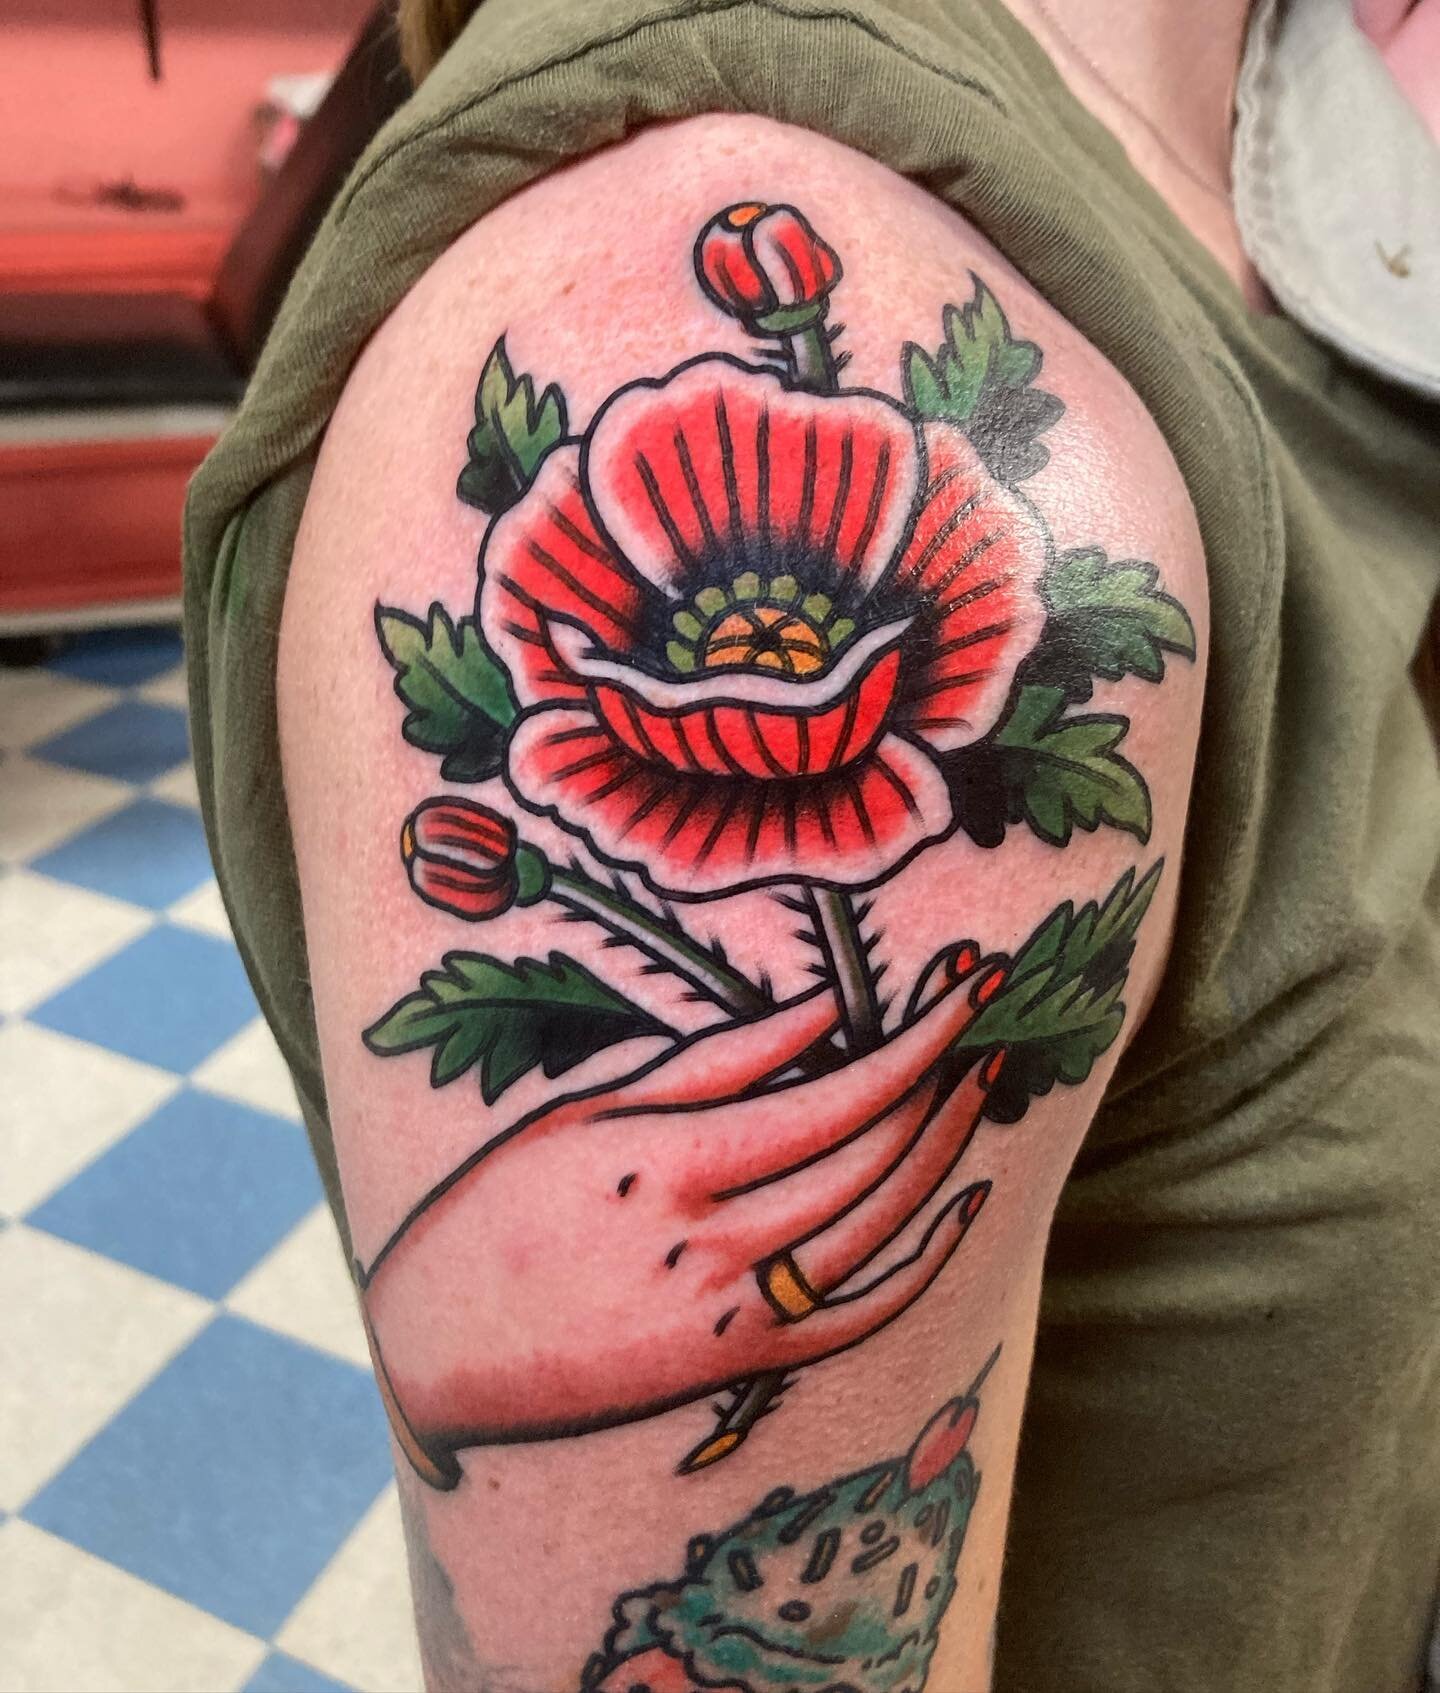 Some poppy tattoos @hotlinetattoo 

**************************************
To get an appointment, click the WAITLIST link in my Bio. If you&rsquo;re looking for something small, or a walk-in tattoo, feel free to call the shop at
508-827-7911 to see i